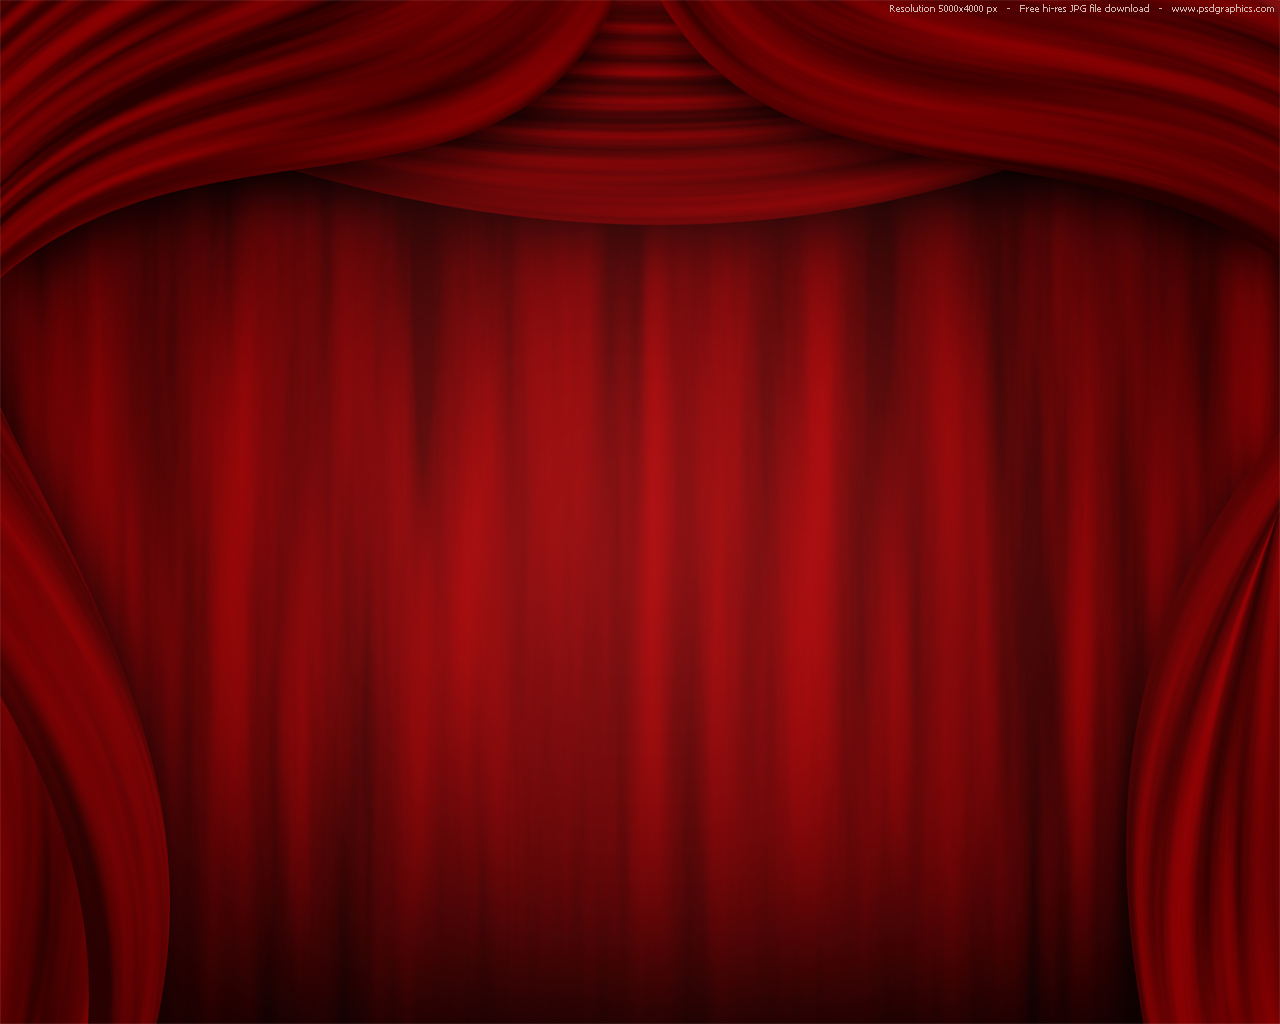 Theater Curtain PPT Backgrounds